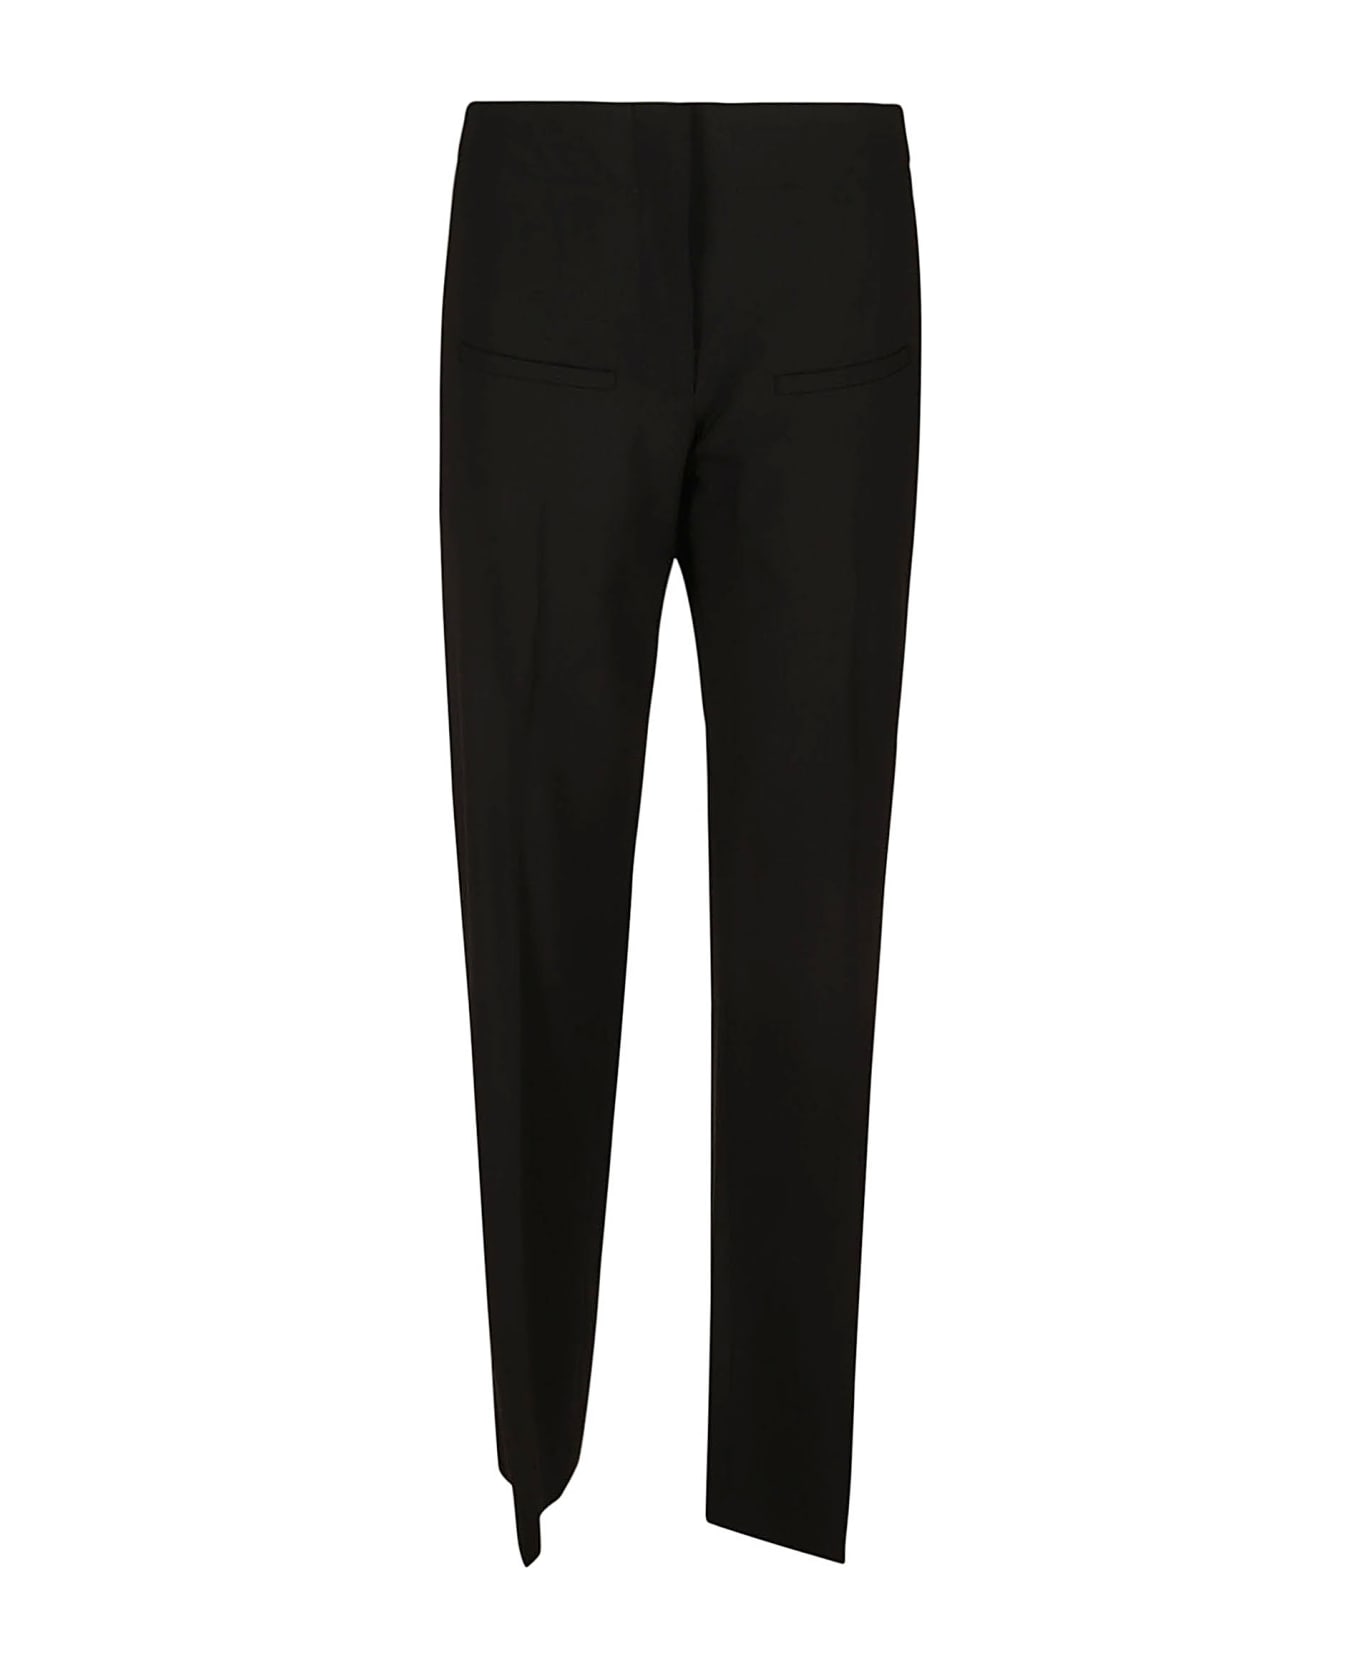 J.W. Anderson Front Pocket Straight Trousers - Black